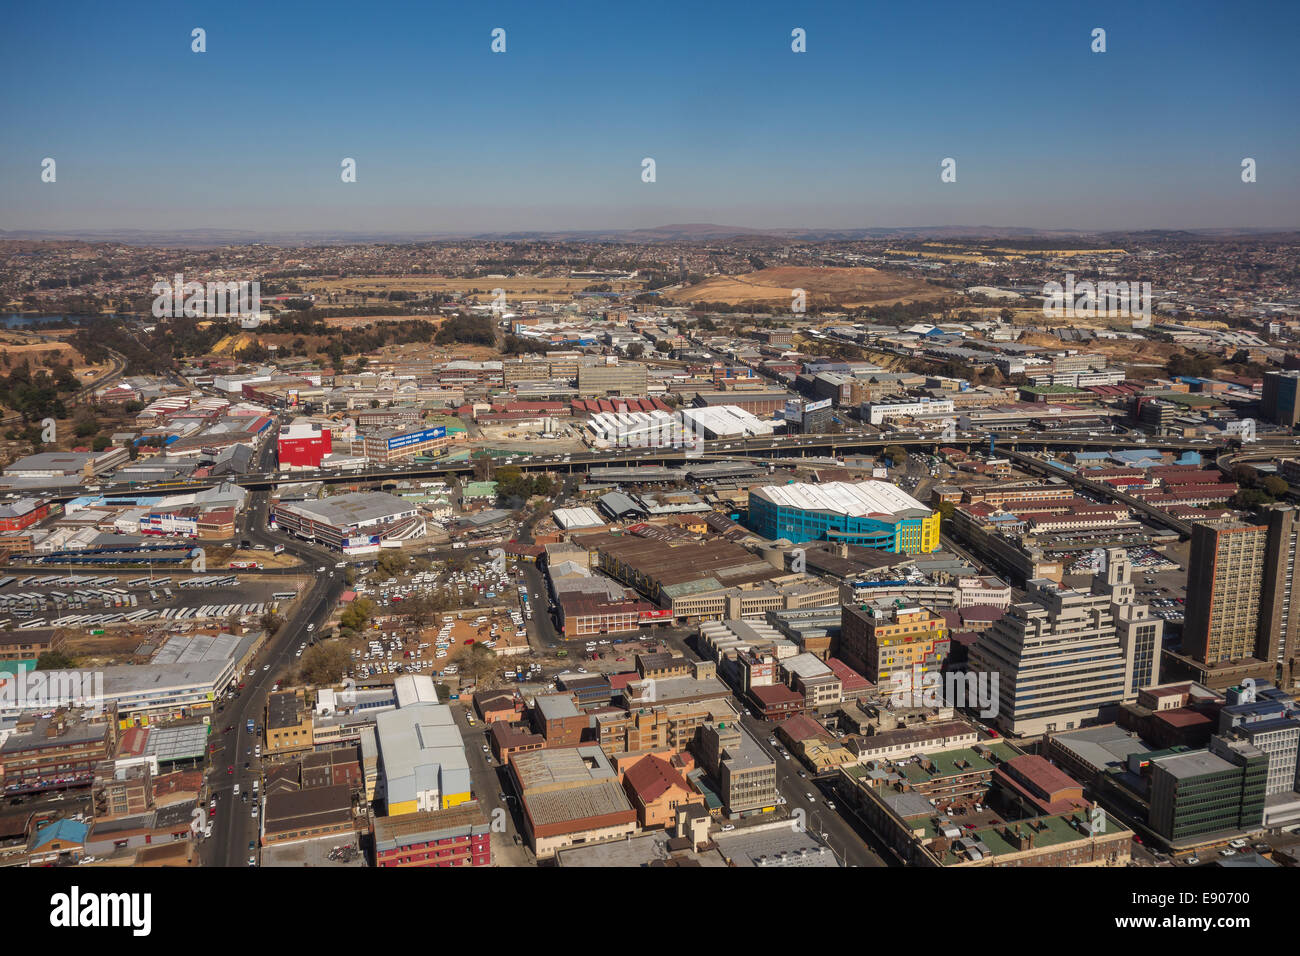 JOHANNESBURG, SOUTH AFRICA - Skyscrapers and buildings in southern section of the central business district. Stock Photo